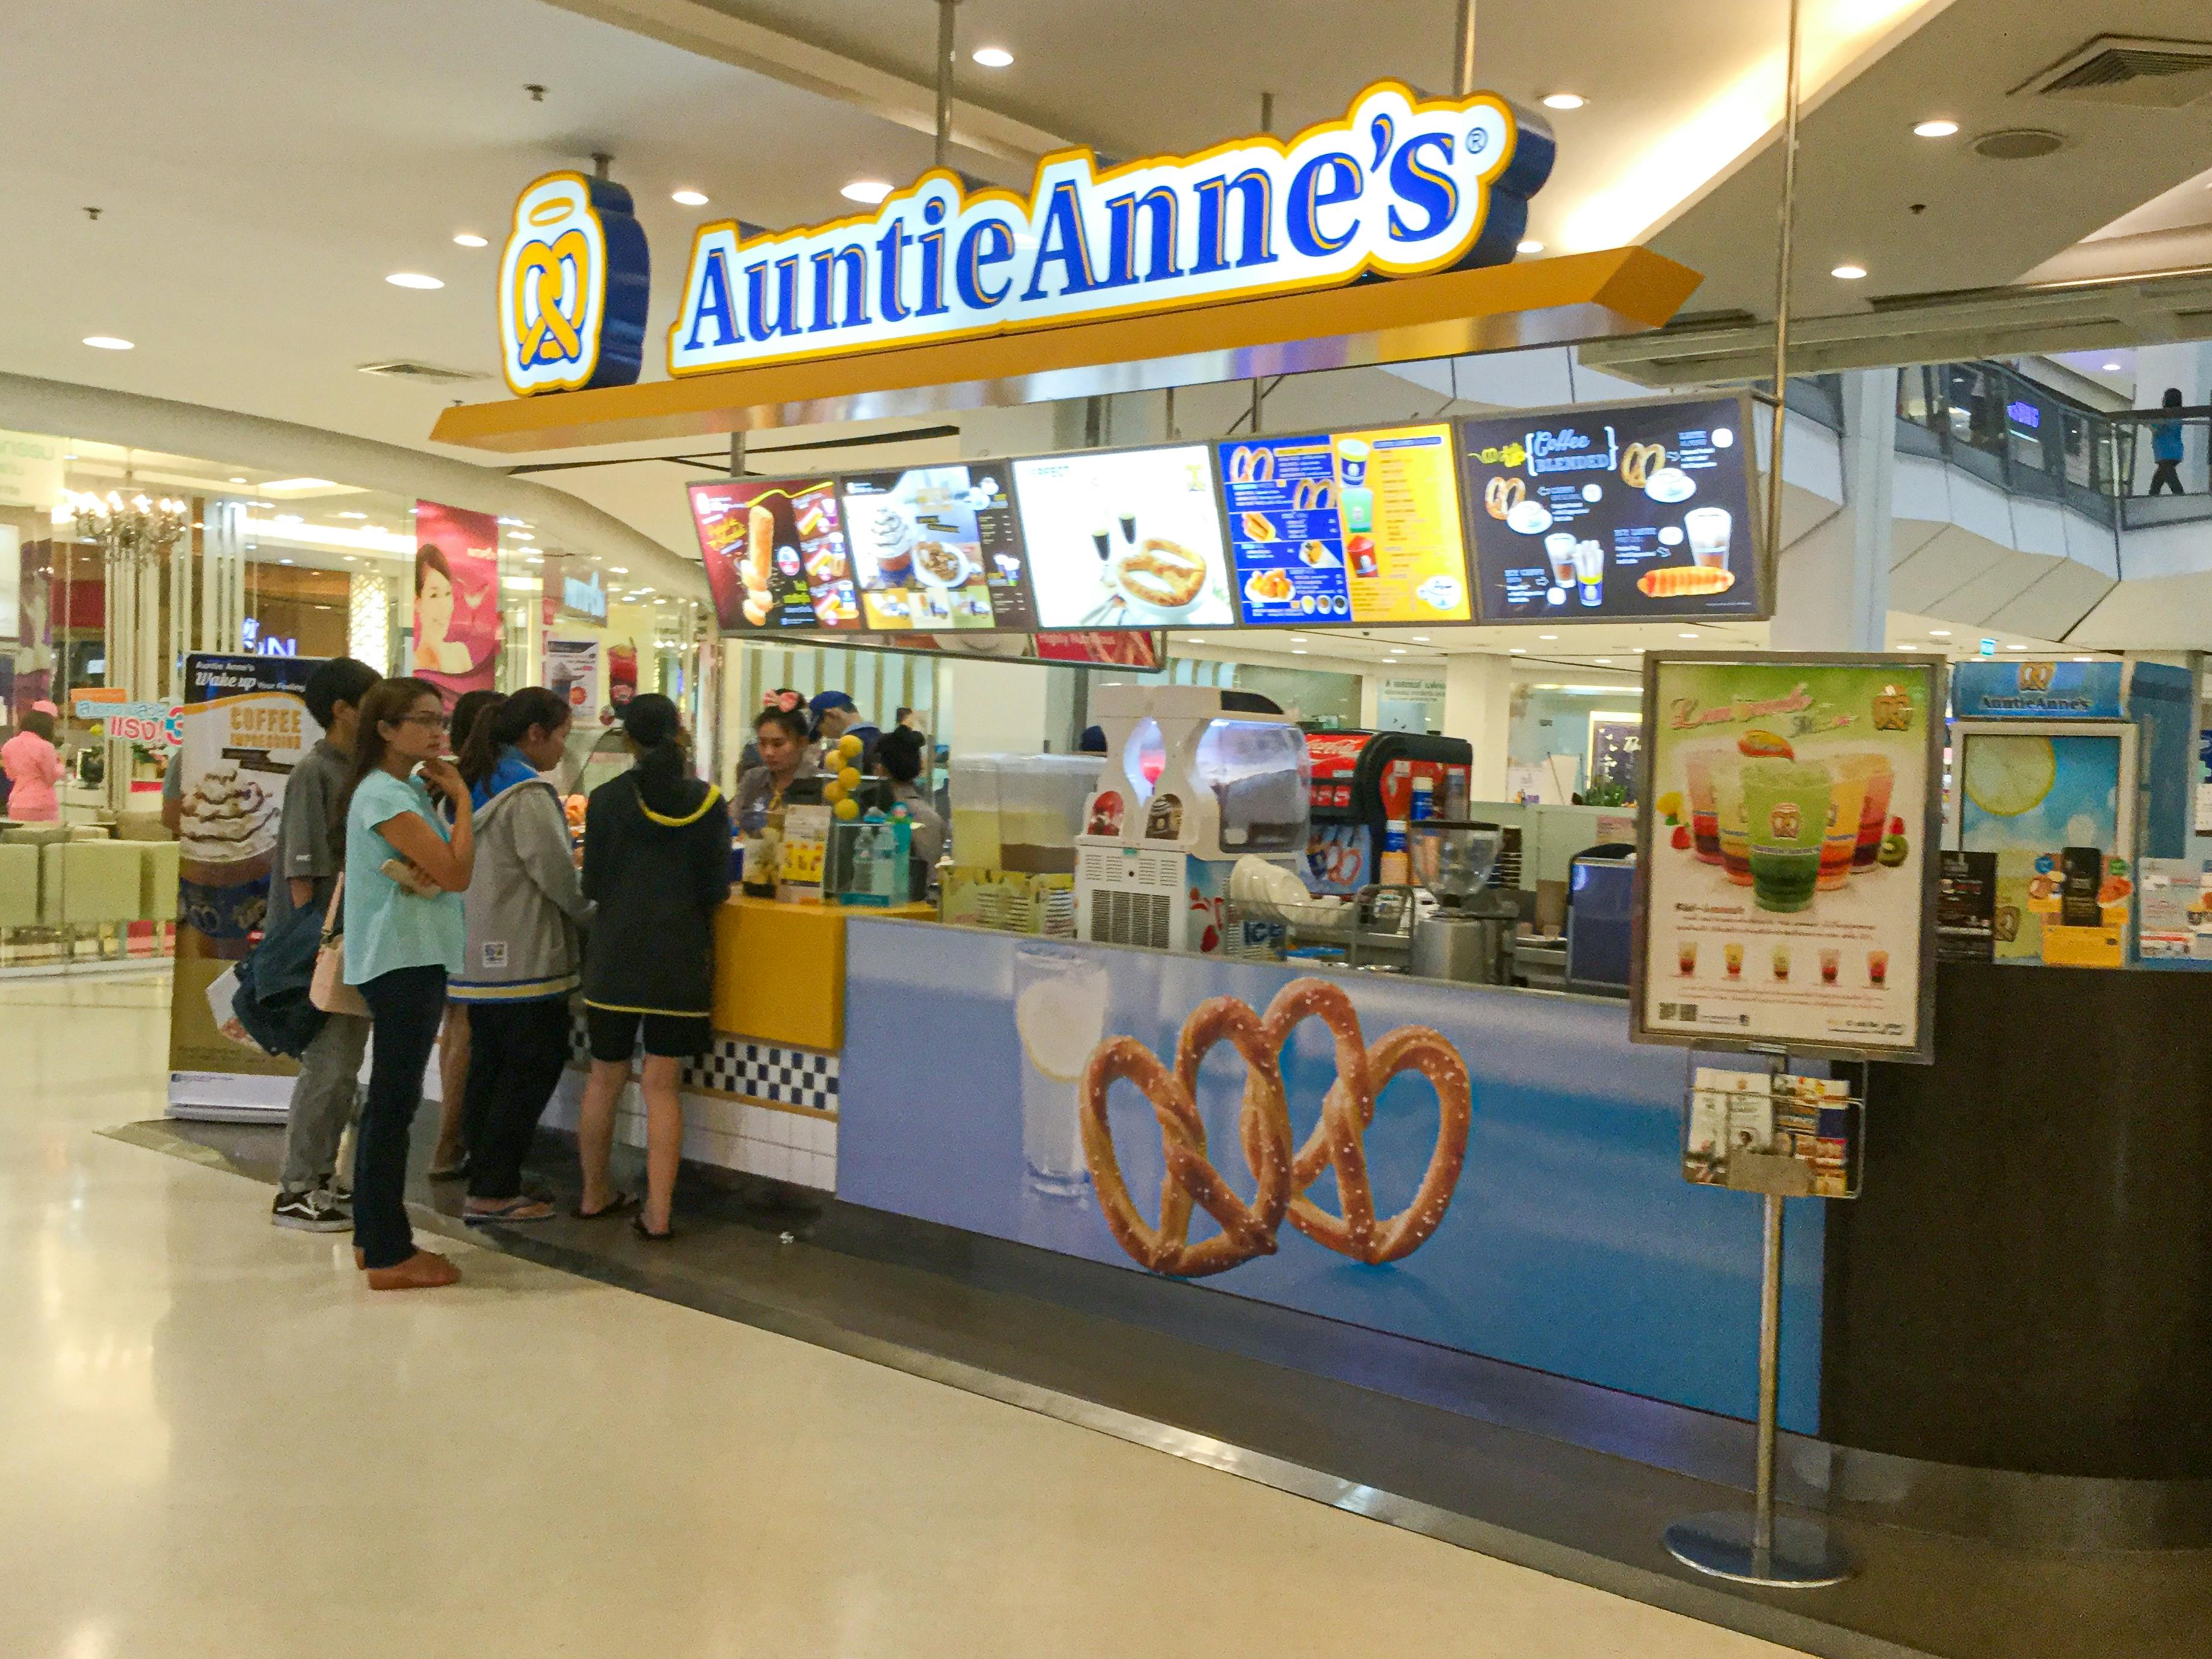 A group of people standing at an Auntie Anne's counter inside a mall.